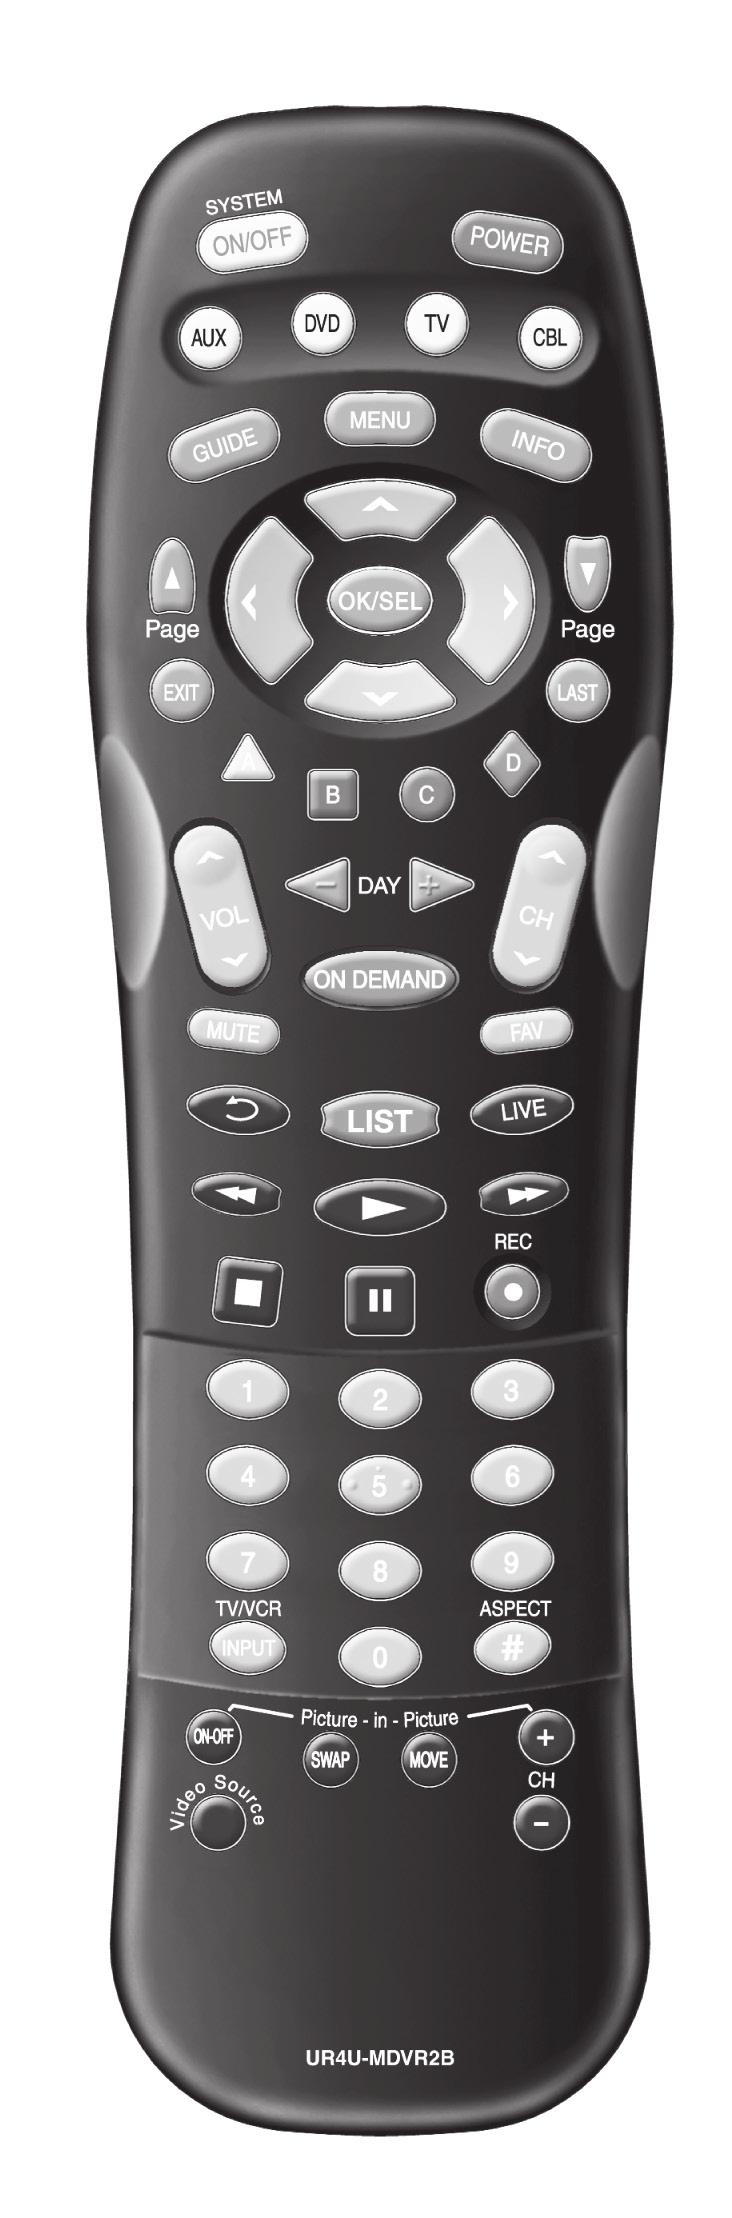 television Remote Control Quick Tips SYSTEM ON/OFF GUIDE Press to quickly jump to your TV listings, organized by time. OK/SELECT Select or confirm highlighted item.